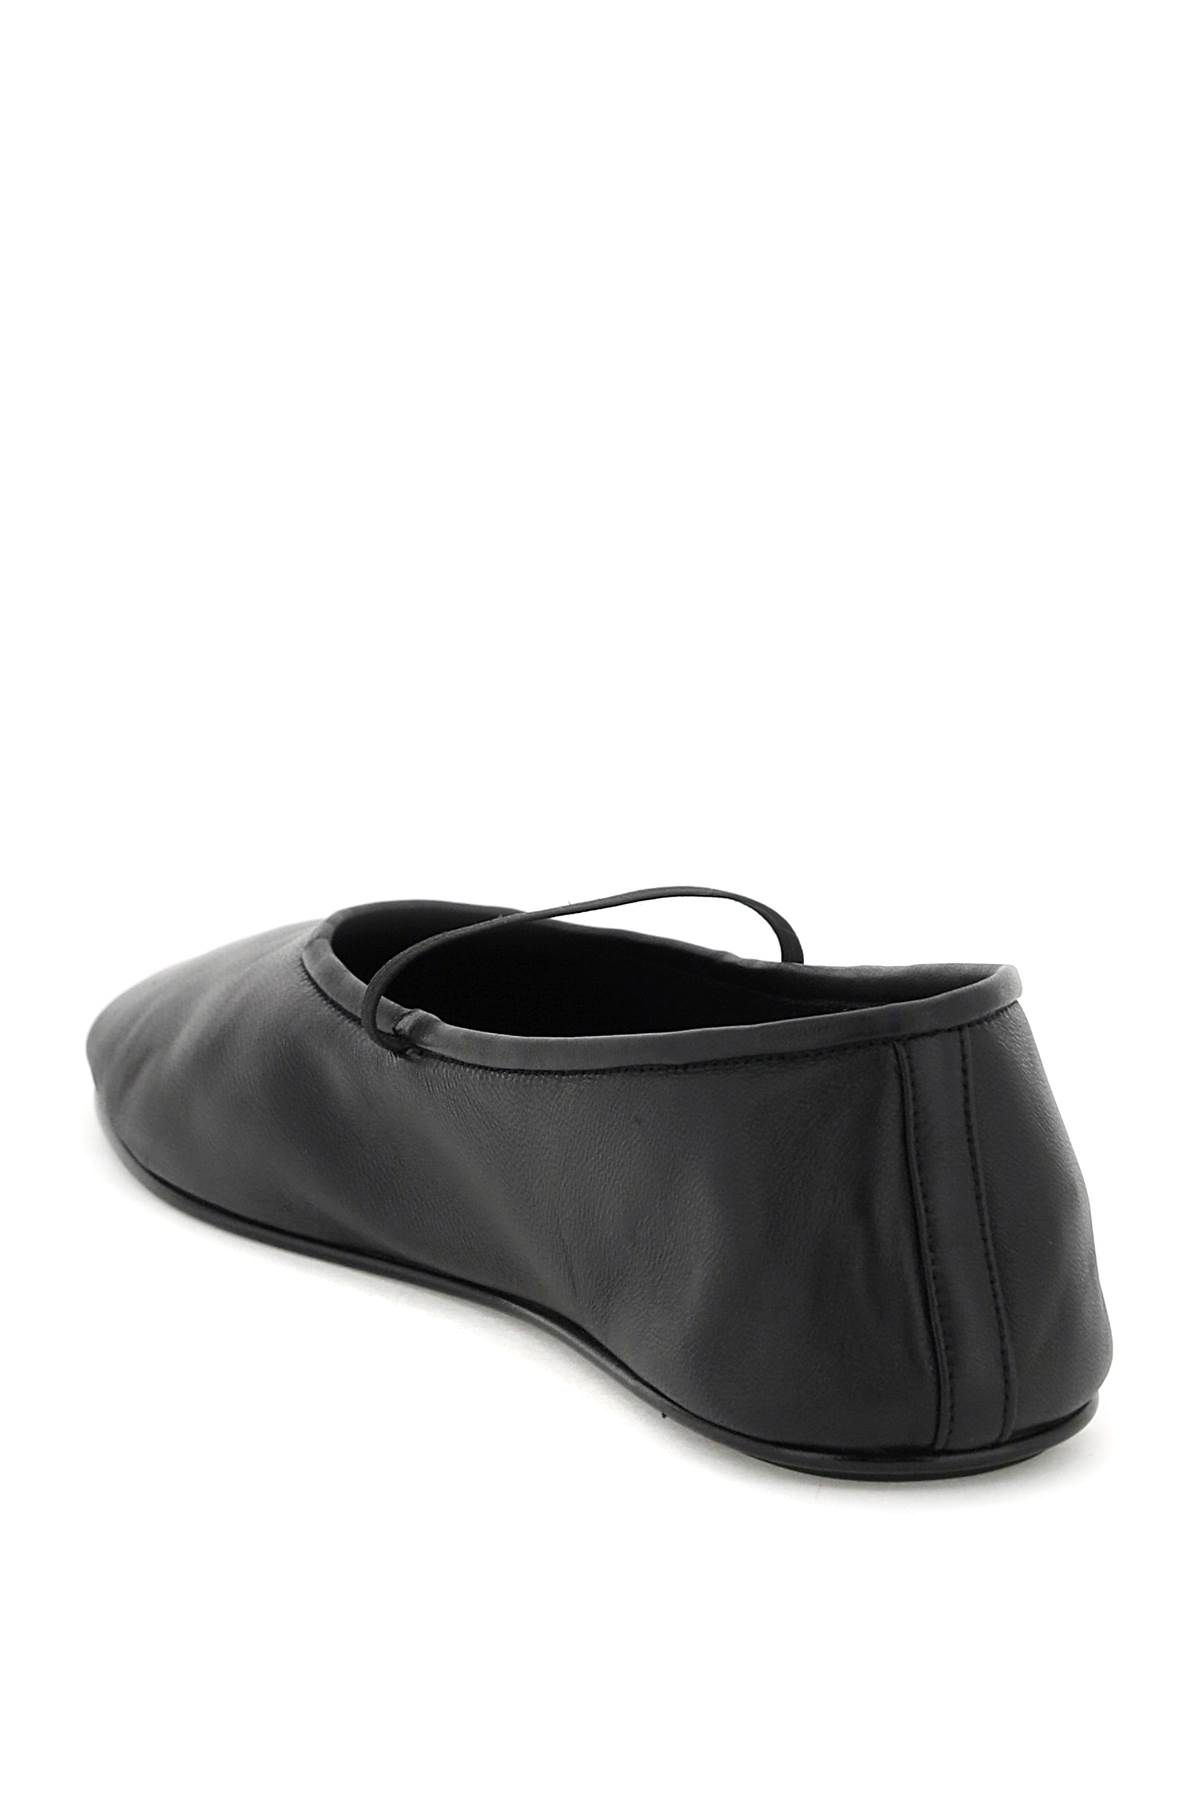 Shop The Row Nappa Leather Ballet Slippers In Black